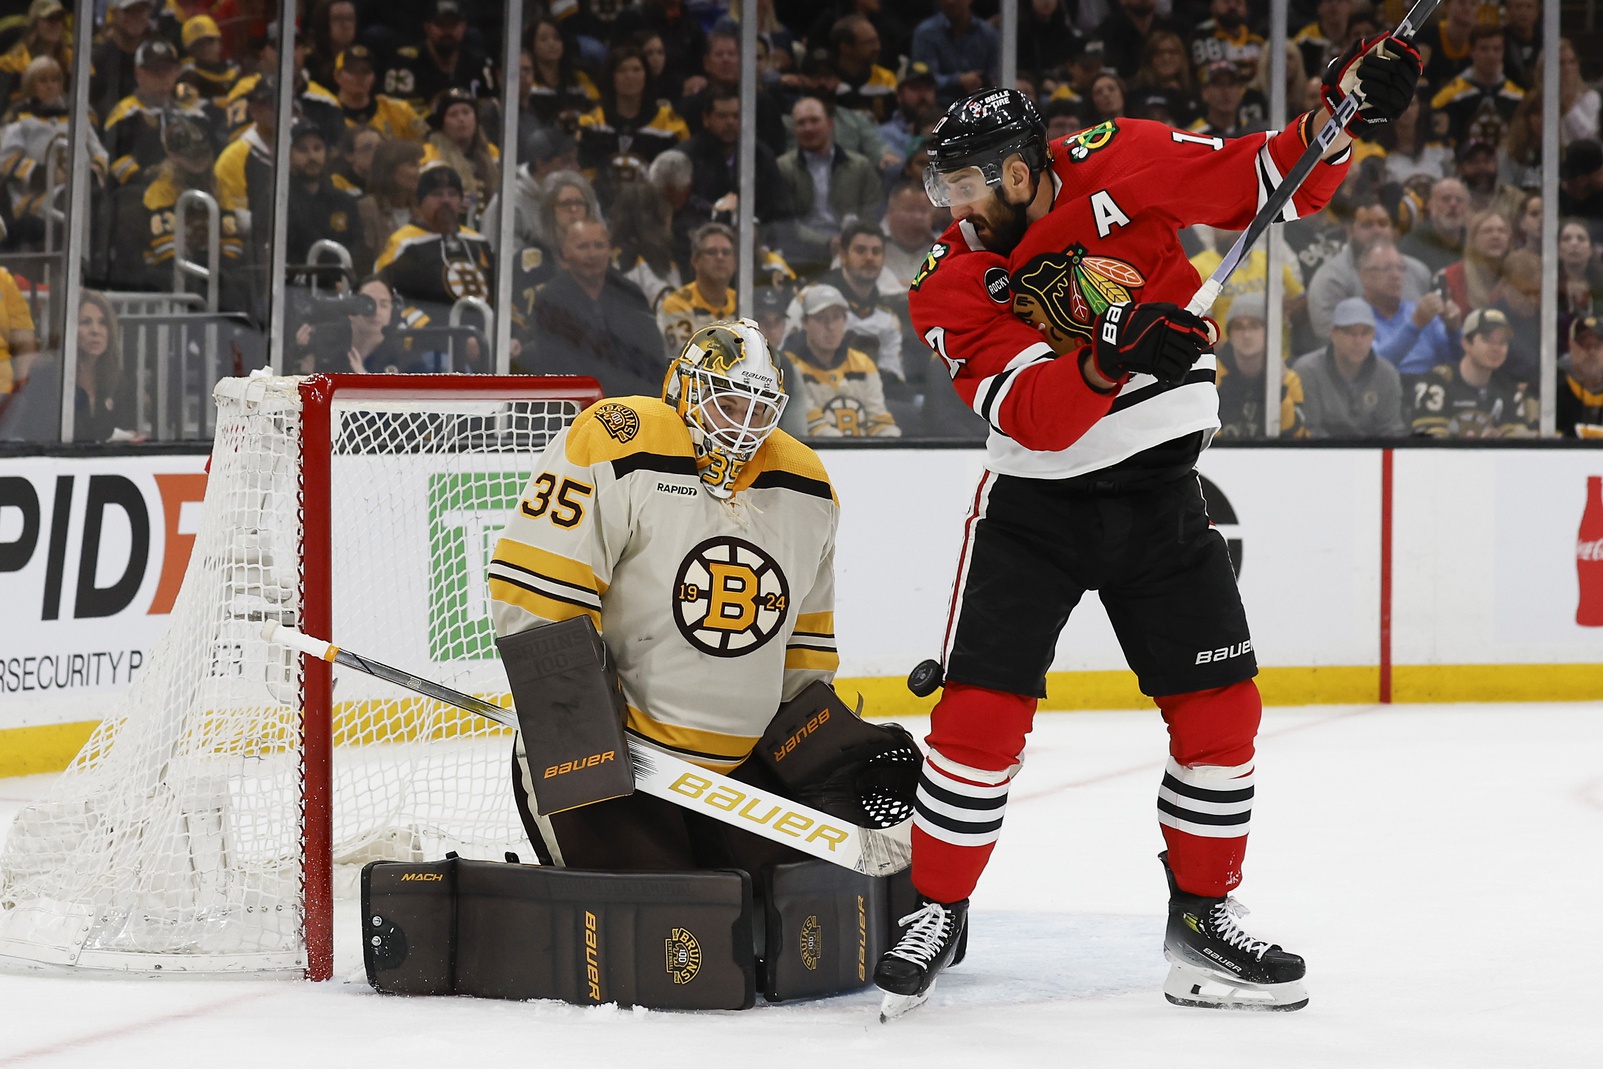 Oct 11, 2023; Boston, Massachusetts, USA; Boston Bruins goaltender Linus Ullmark (35) makes a save as Chicago Blackhawks left wing Nick Foligno (17) looks for the rebound during the first period at TD Garden. Mandatory Credit: Winslow Townson-USA TODAY Sports